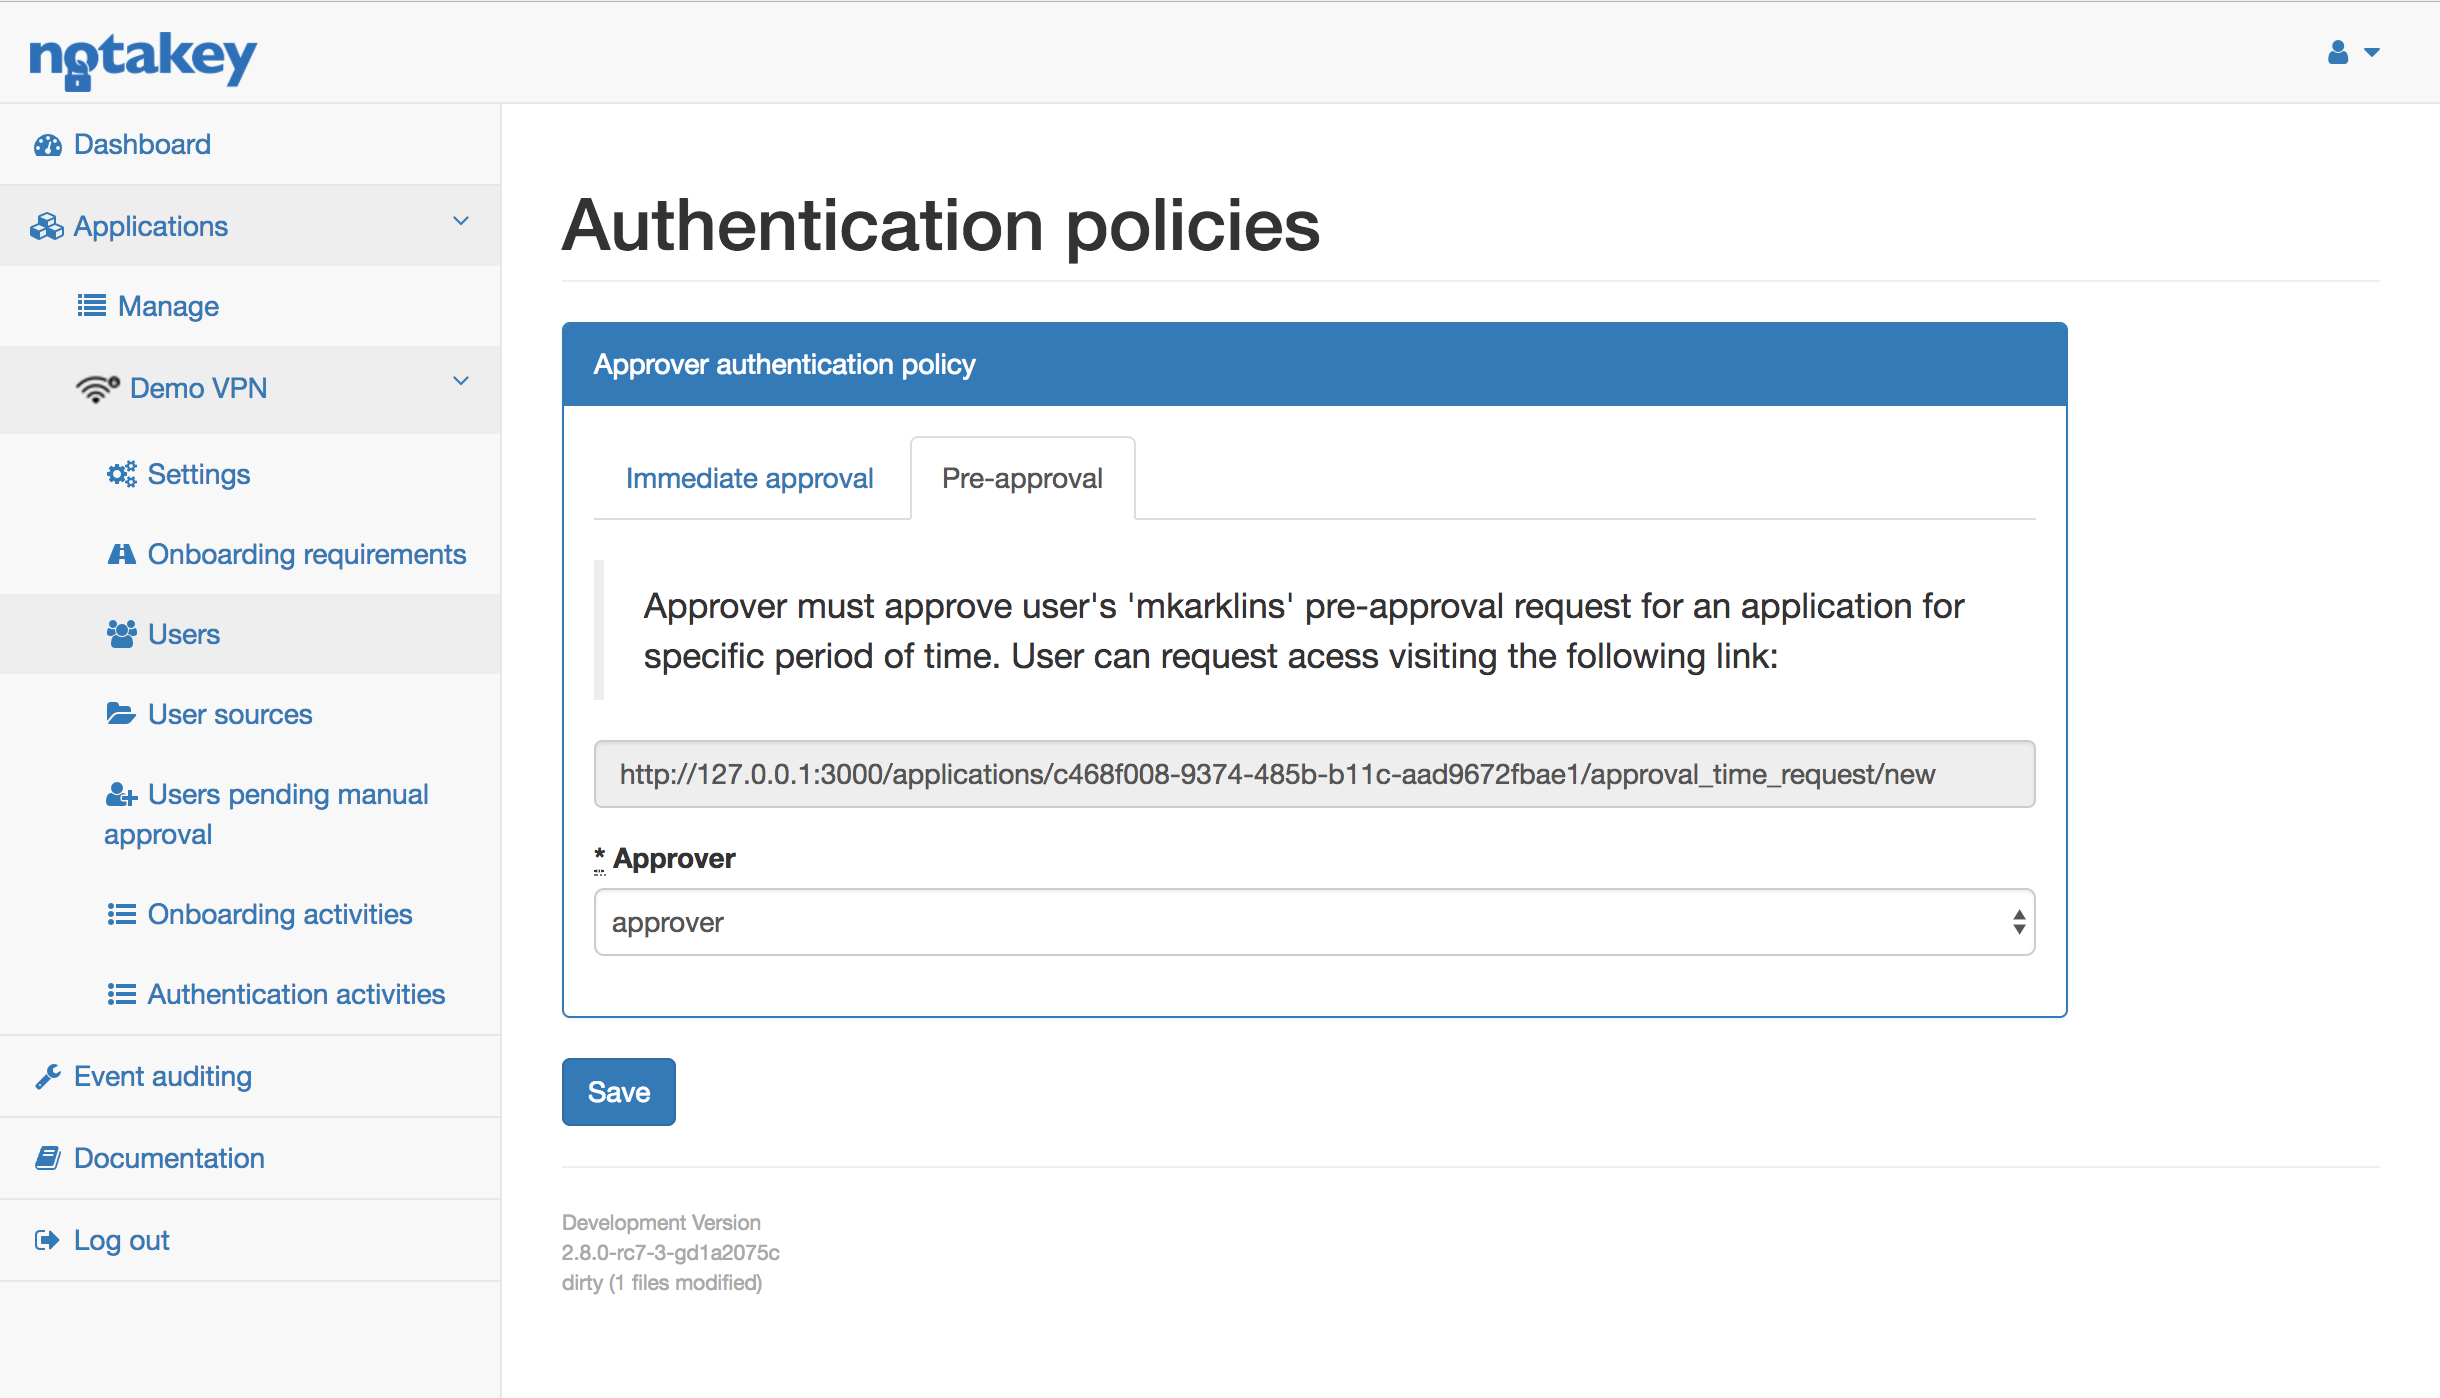 New pre-approval authentication policy